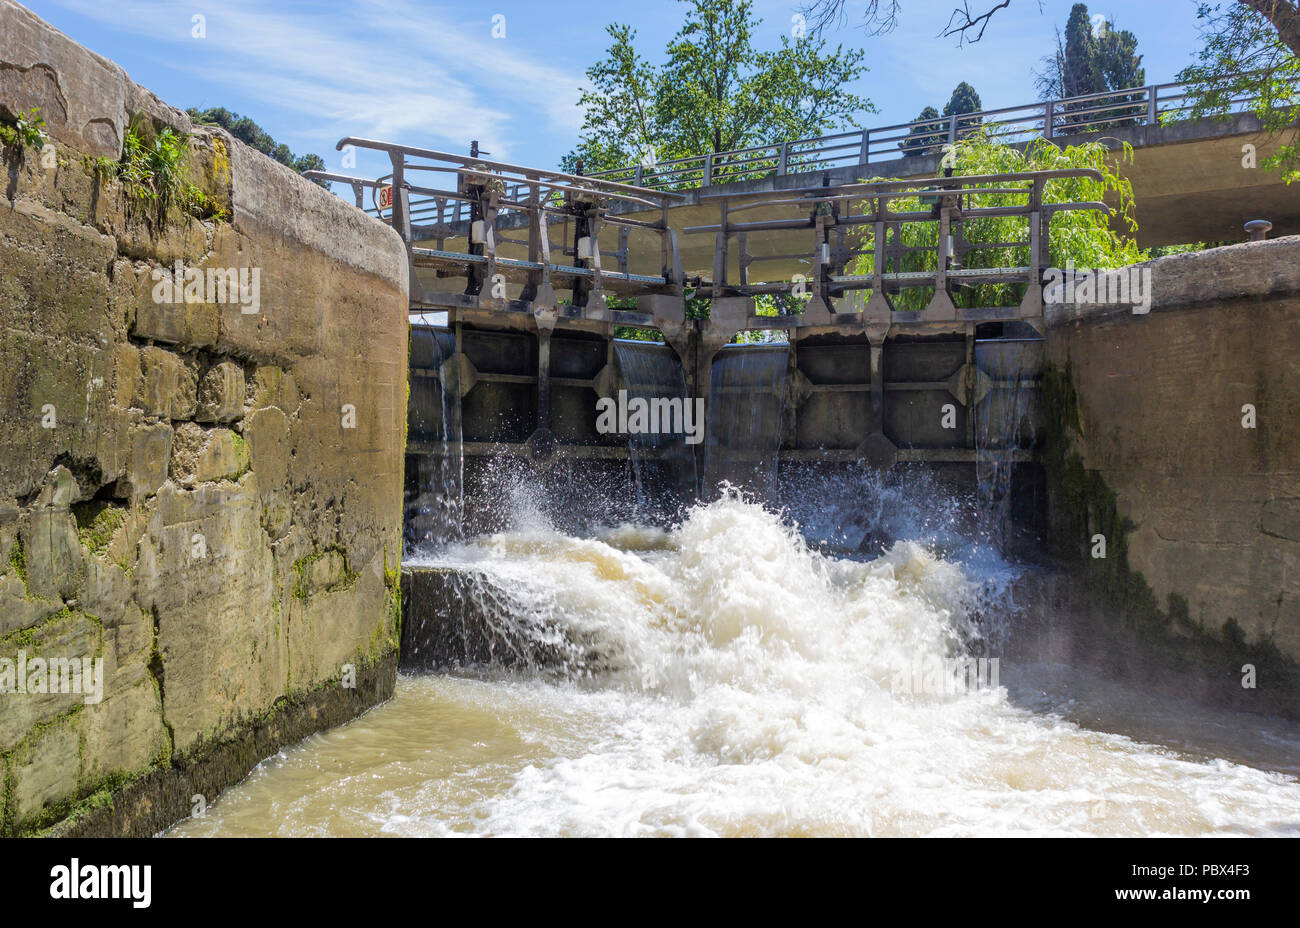 Canal du Midi, Carcassonne, French department of Aude, Occitanie Region, France. Lock gates opening on the canal. Stock Photo